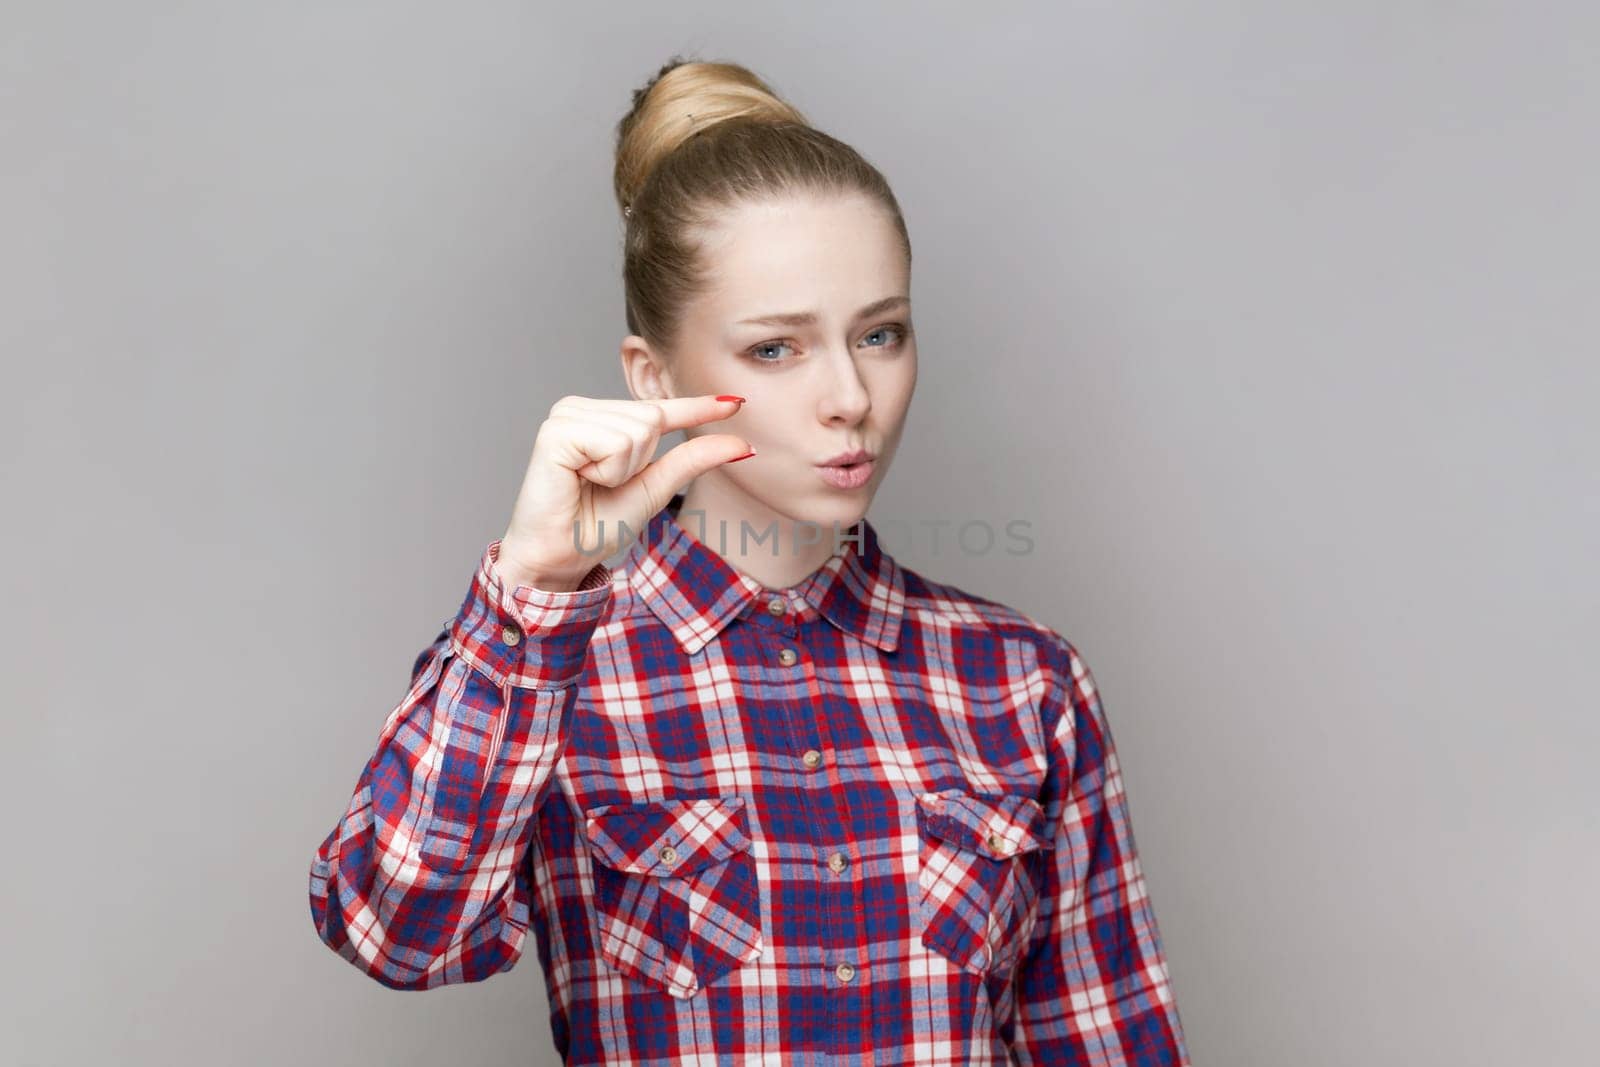 Portrait of beautiful adorable woman with bun hairstyle standing looking at camera, showing small gesture with fingers, wearing checkered shirt. Indoor studio shot isolated on gray background.